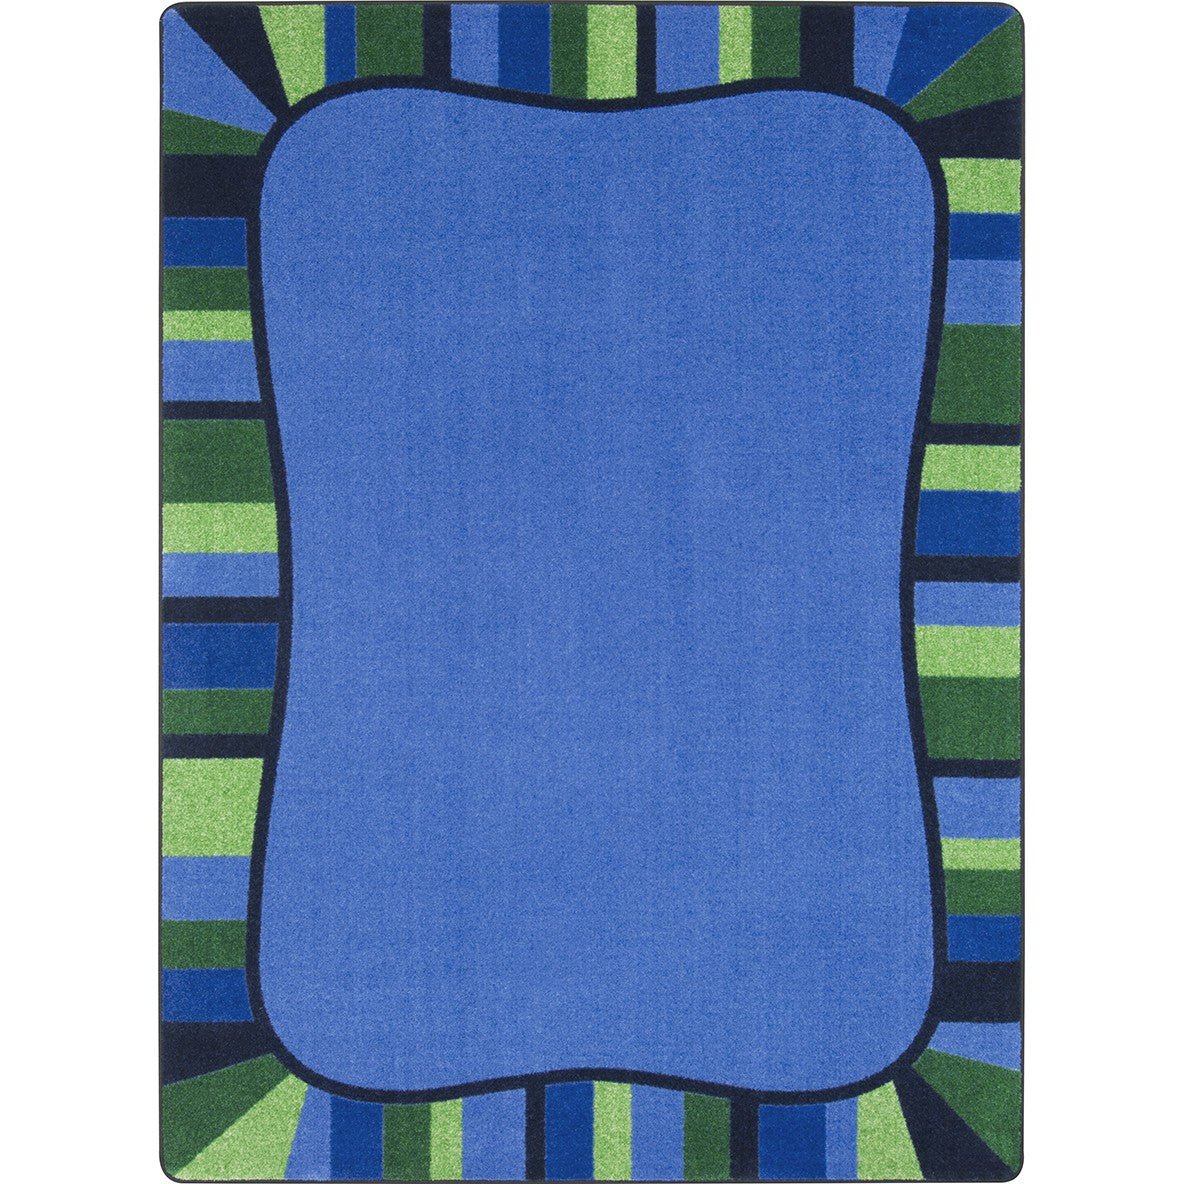 Colorful Accents Kid Essentials Collection Area Rug for Classrooms and Schools Libraries by Joy Carpets - SchoolOutlet